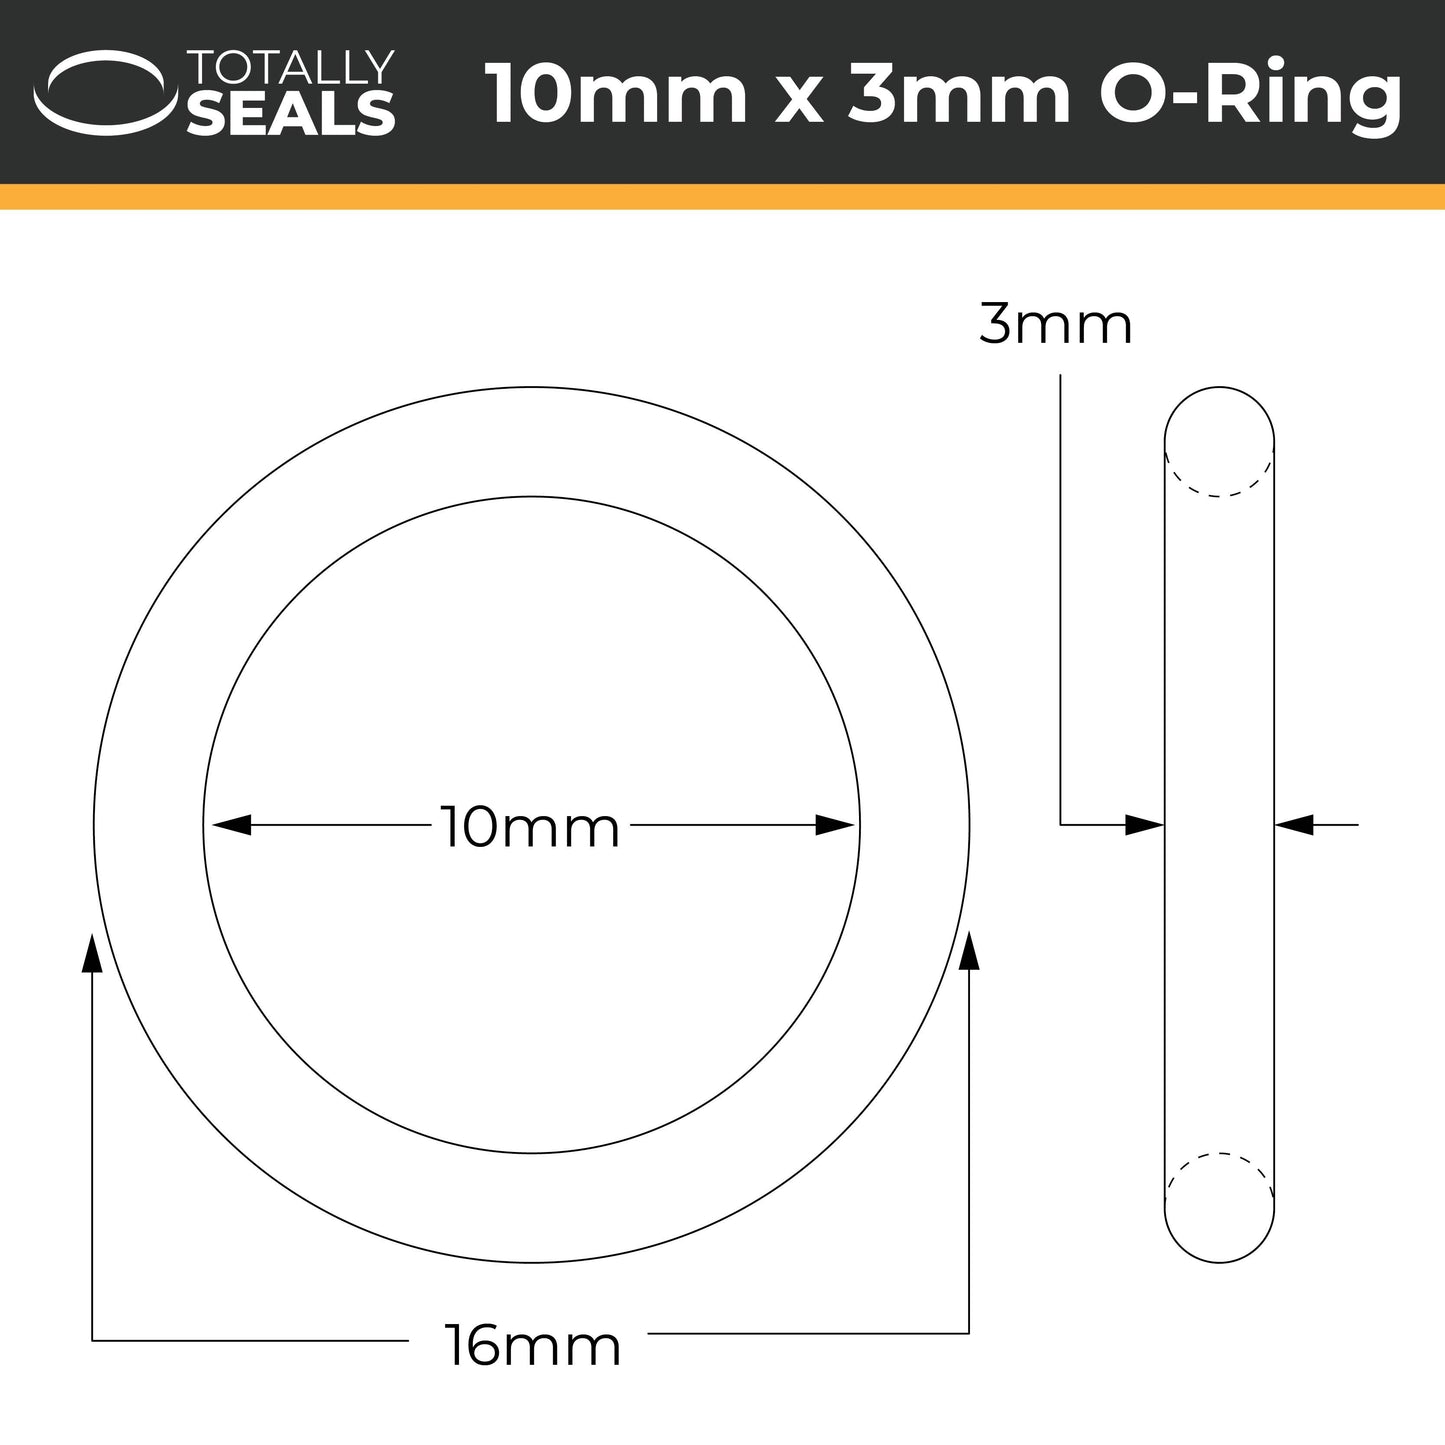 10mm x 3mm (16mm OD) Nitrile O-Rings - Totally Seals®